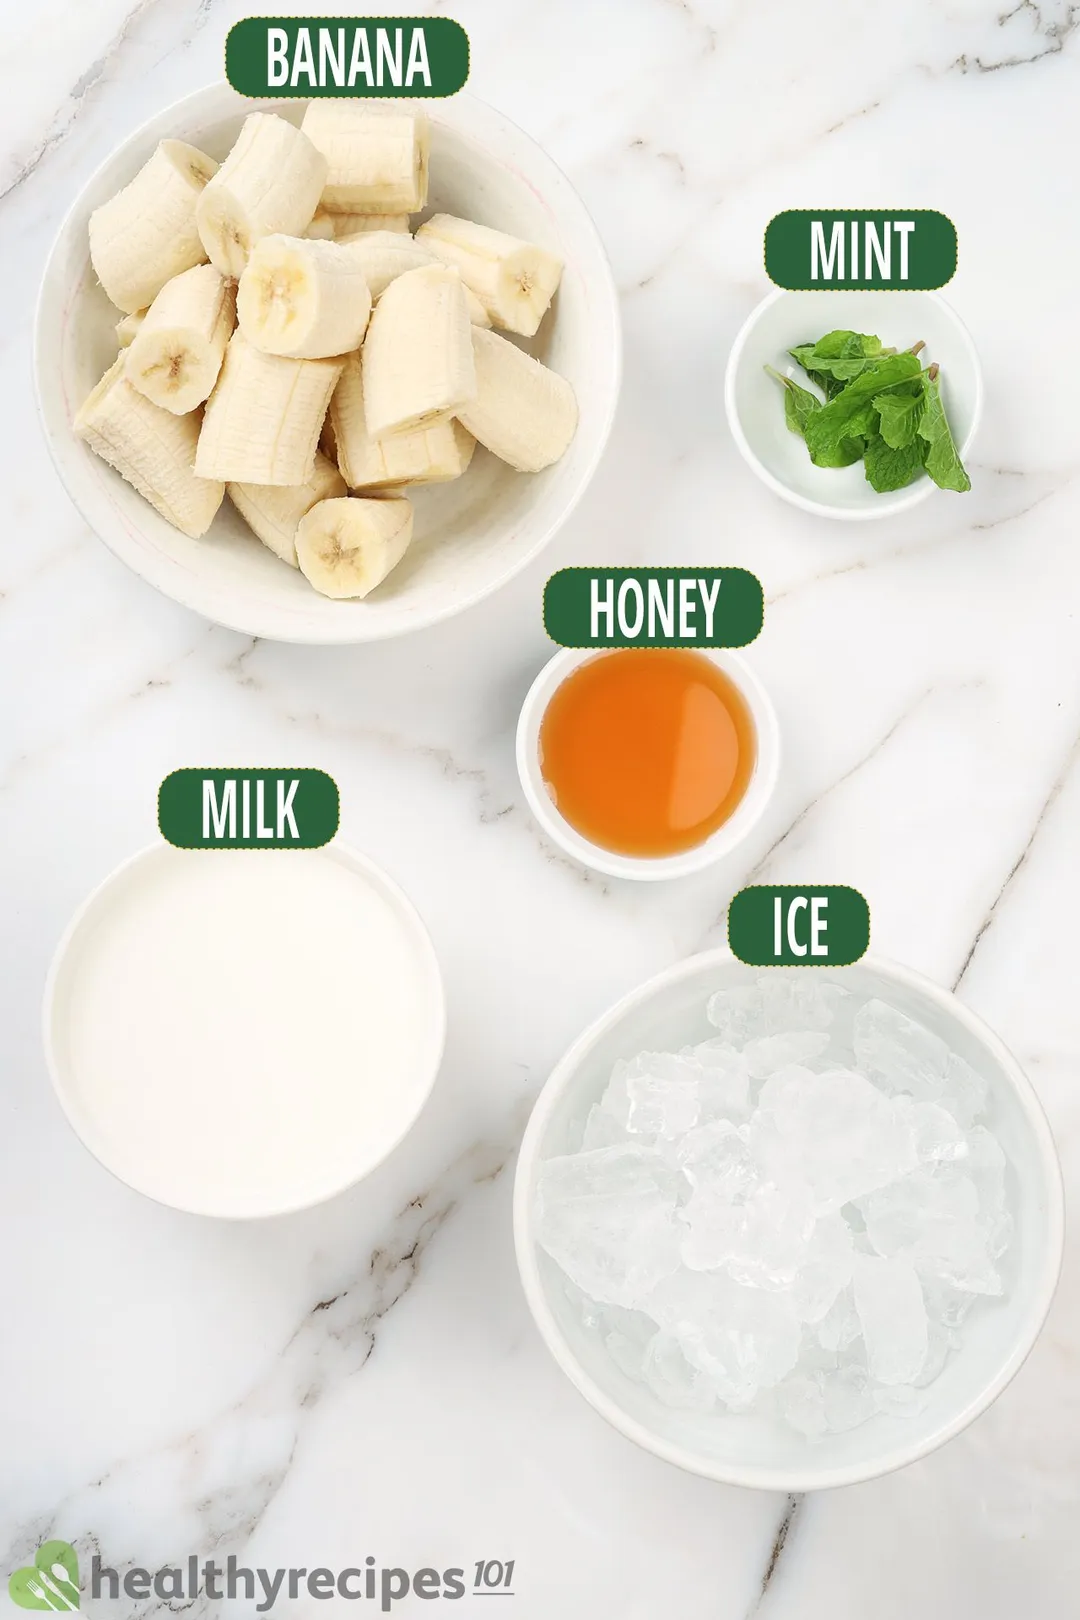 Ingredients for banana smoothie, including peeled and sliced banana, honey, mint leaves, milk, and ice. 